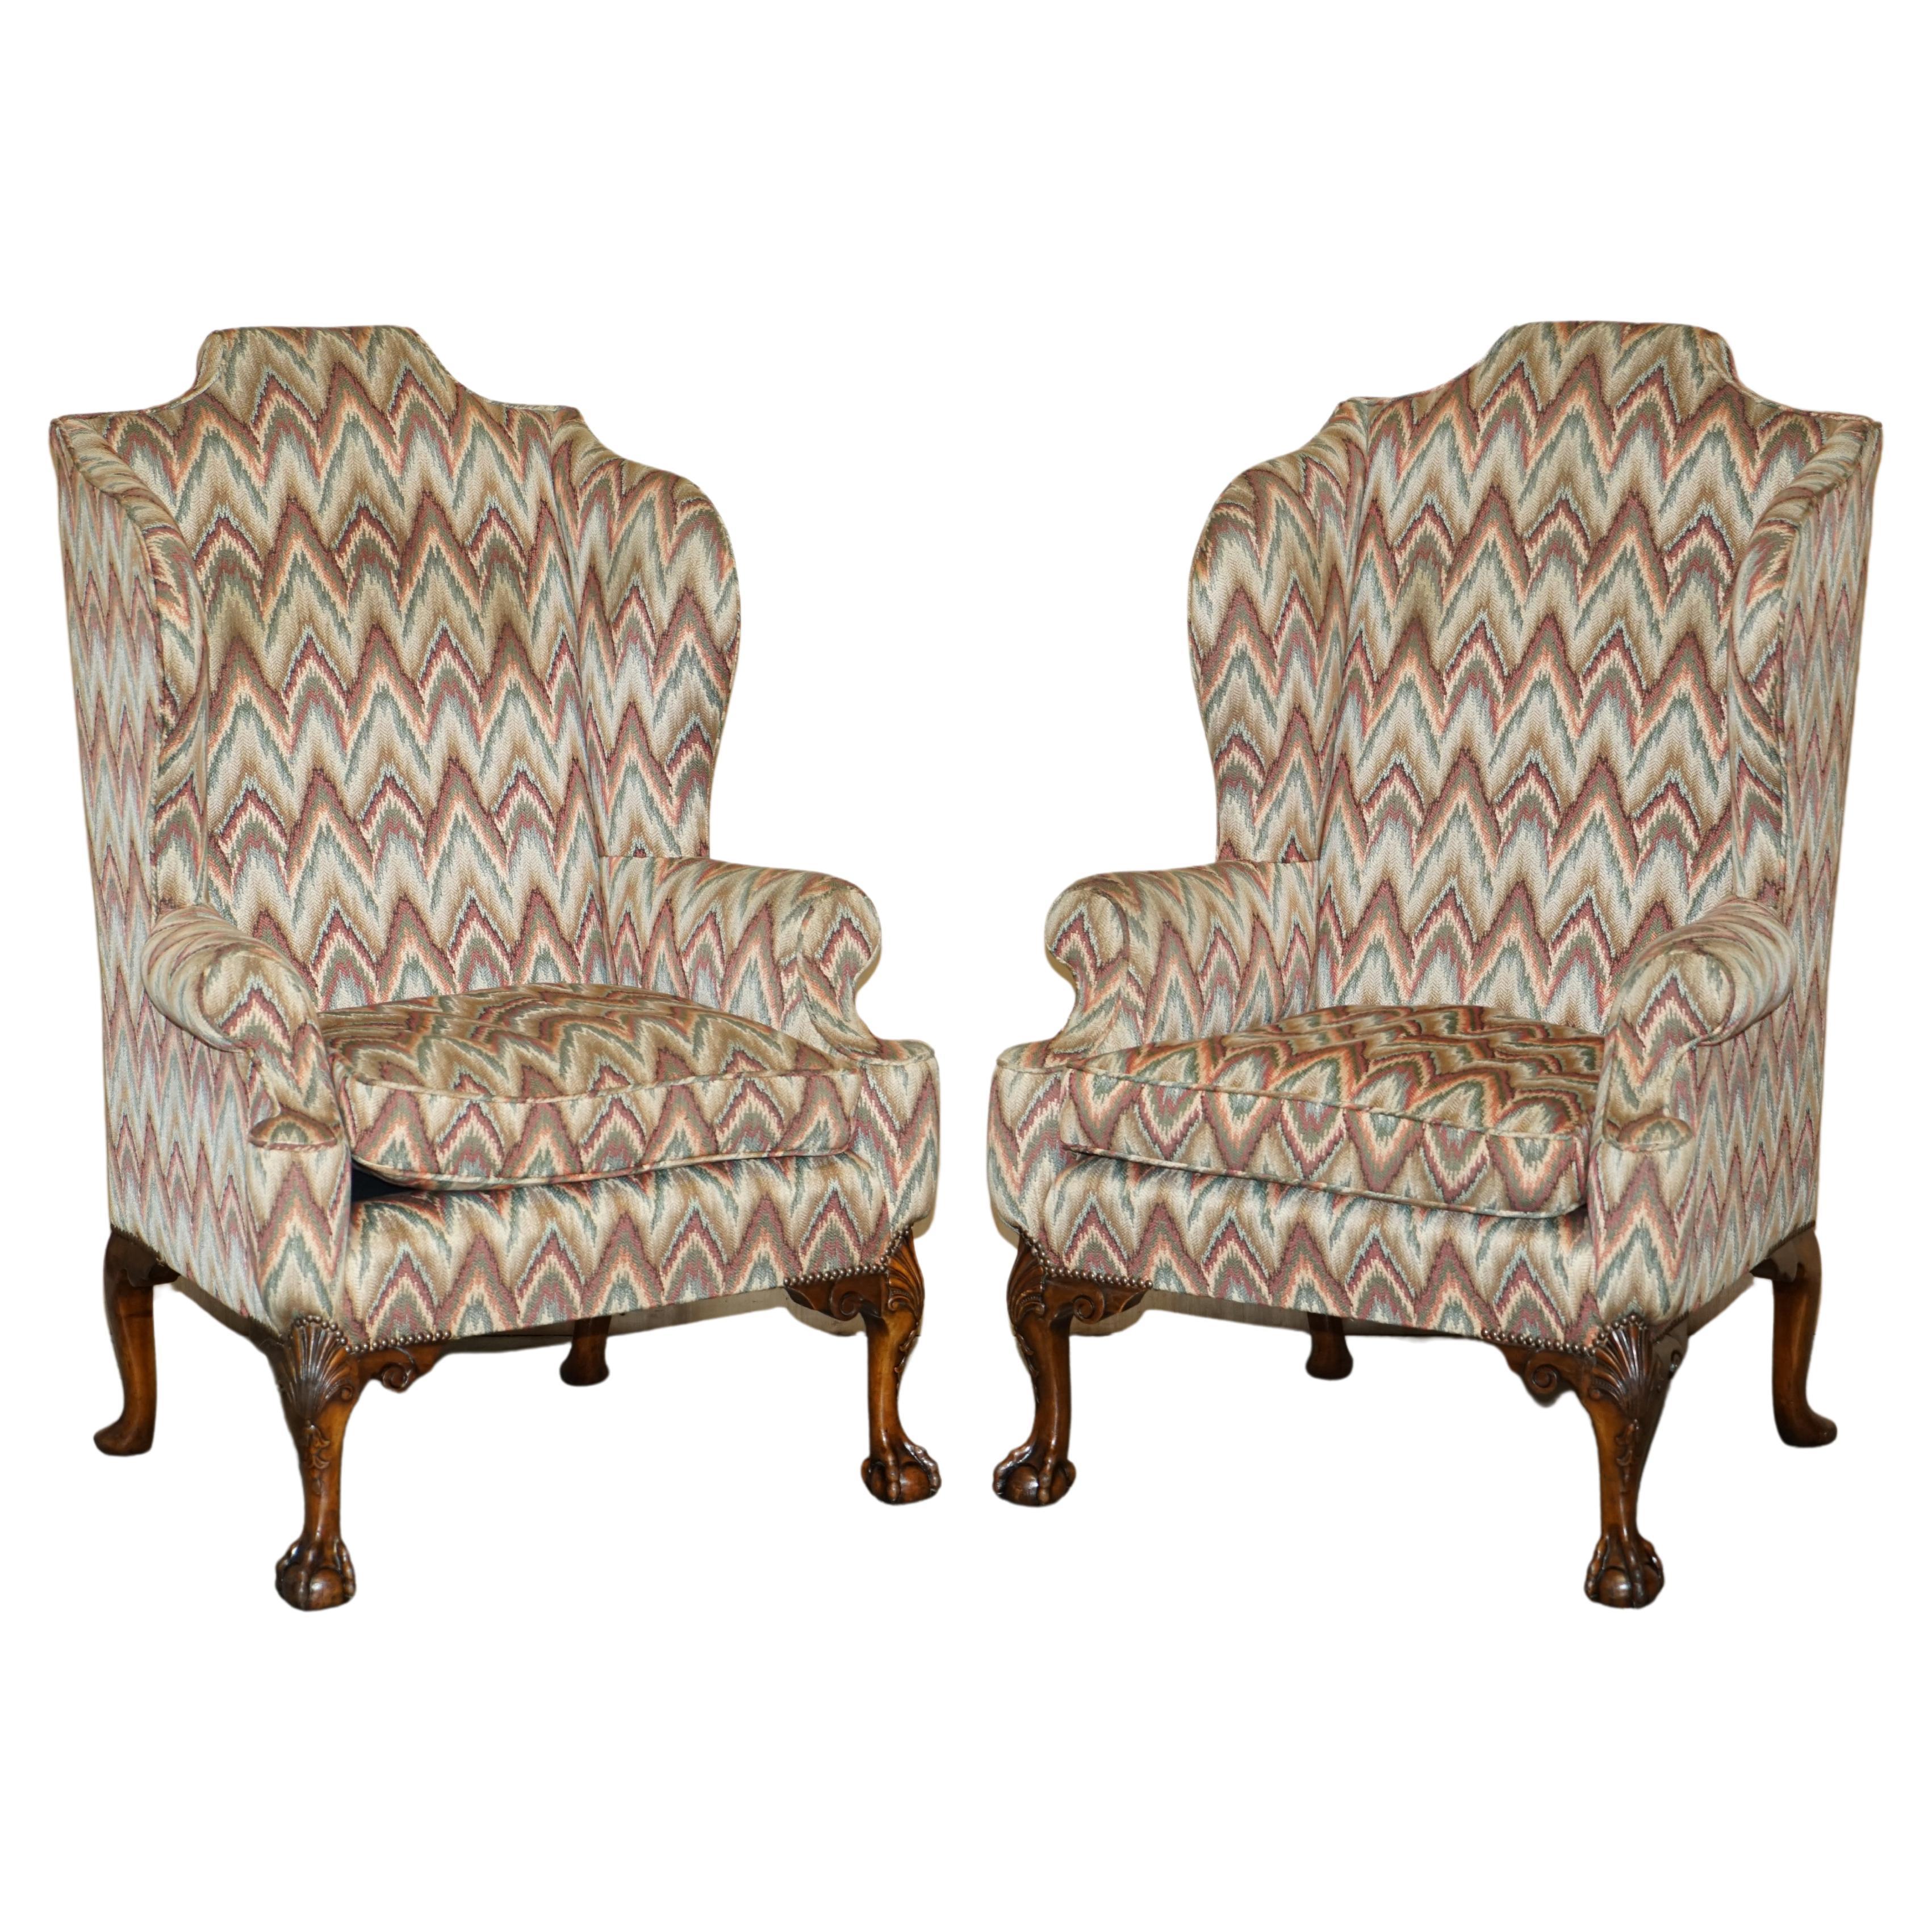 Royal House Antiques

Royal House Antiques is delighted to offer for sale this exquisite pair of Antique circa 1900-1920 extra large wingback armchairs with hand carved Claw & Ball Cabriolet legs and Kilim style upholstery fabric 

Please note the